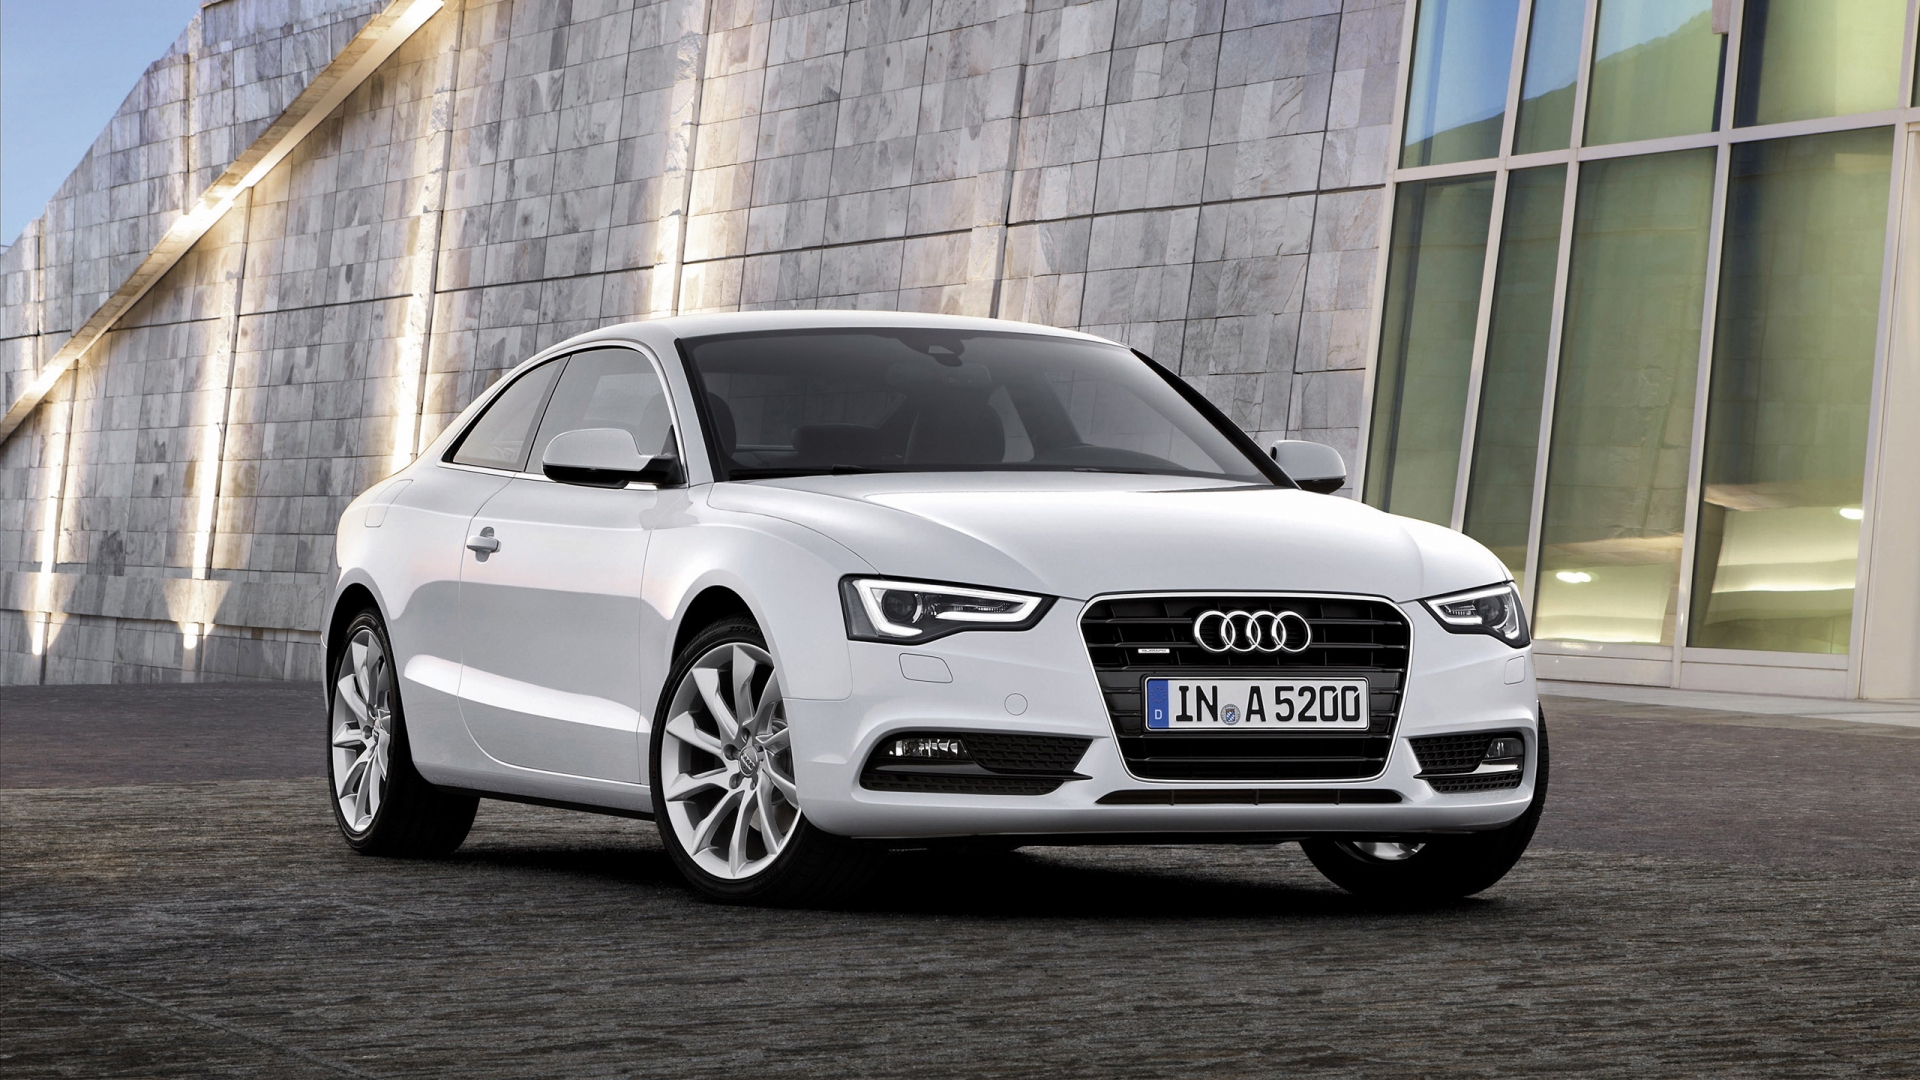 2012 Audi A5 Coupe for 1920 x 1080 HDTV 1080p resolution